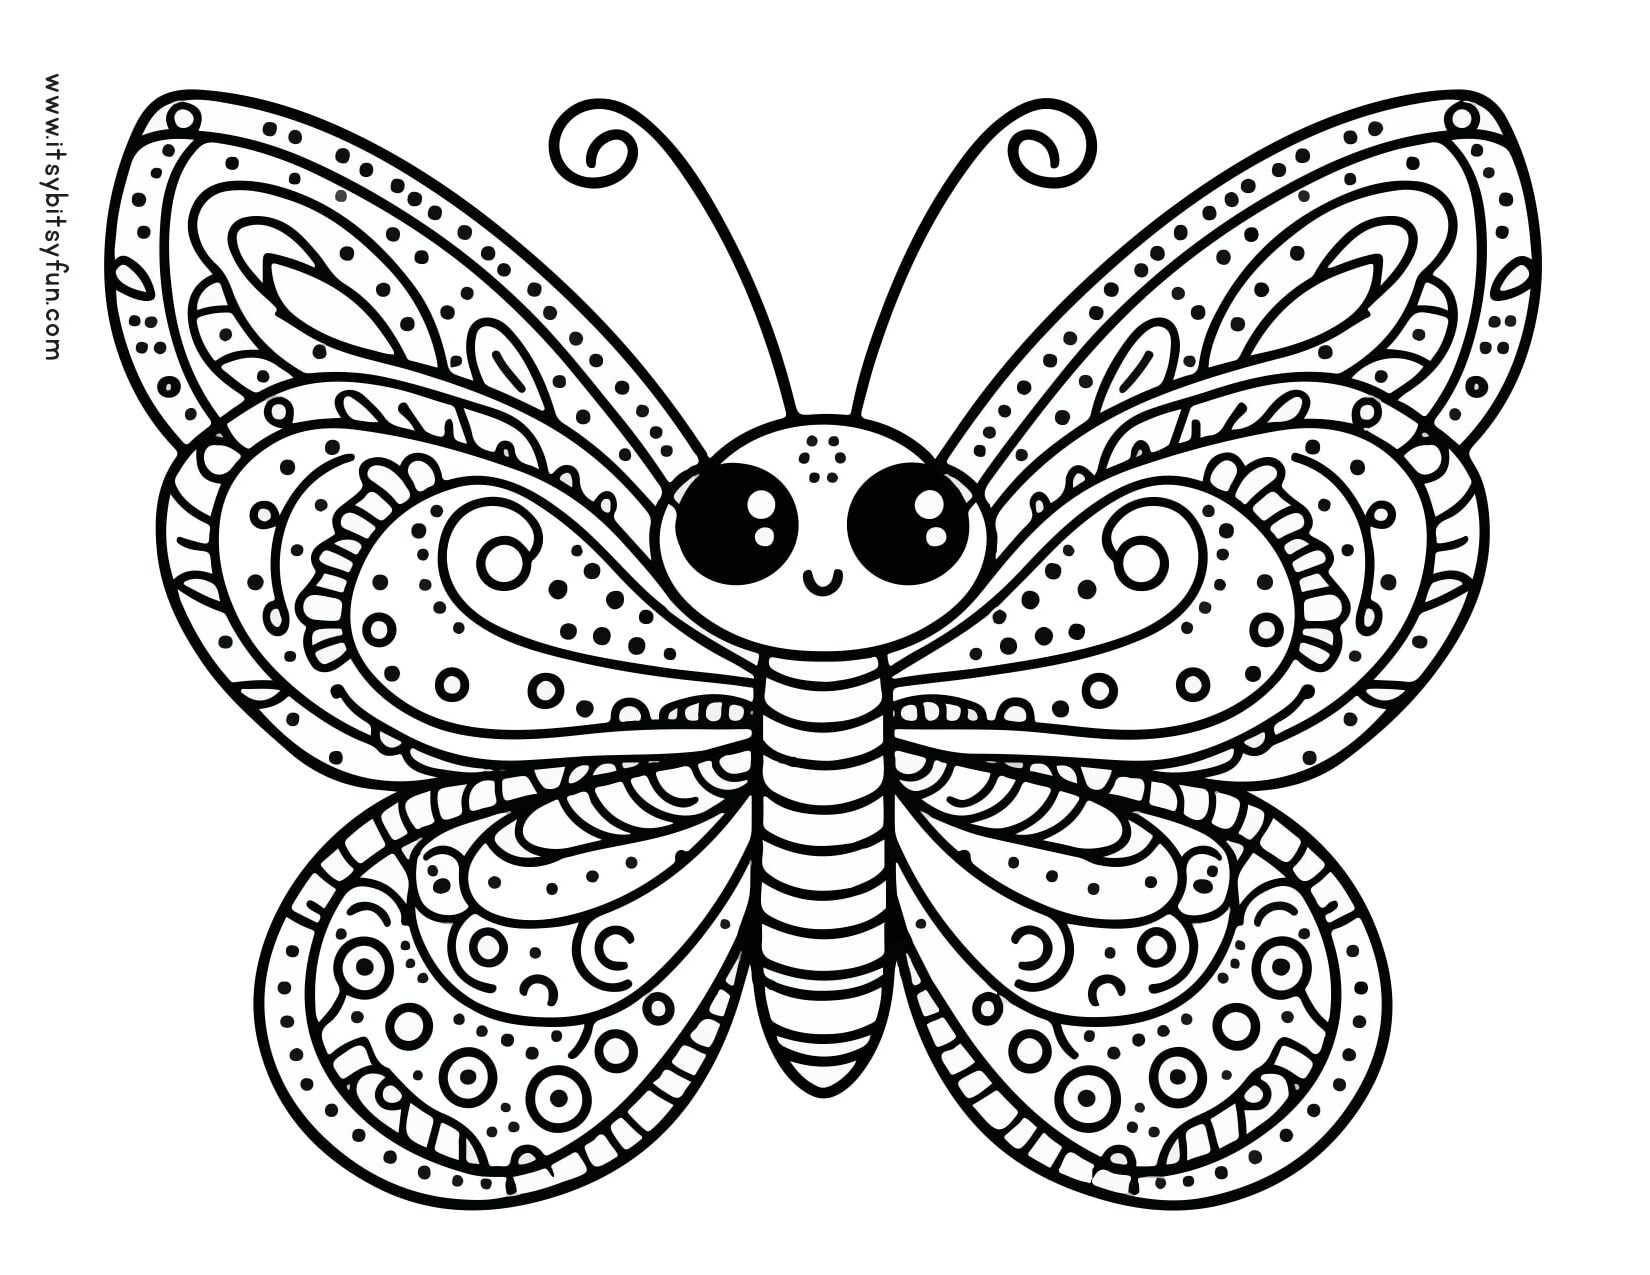 Butterfly illustration to color.